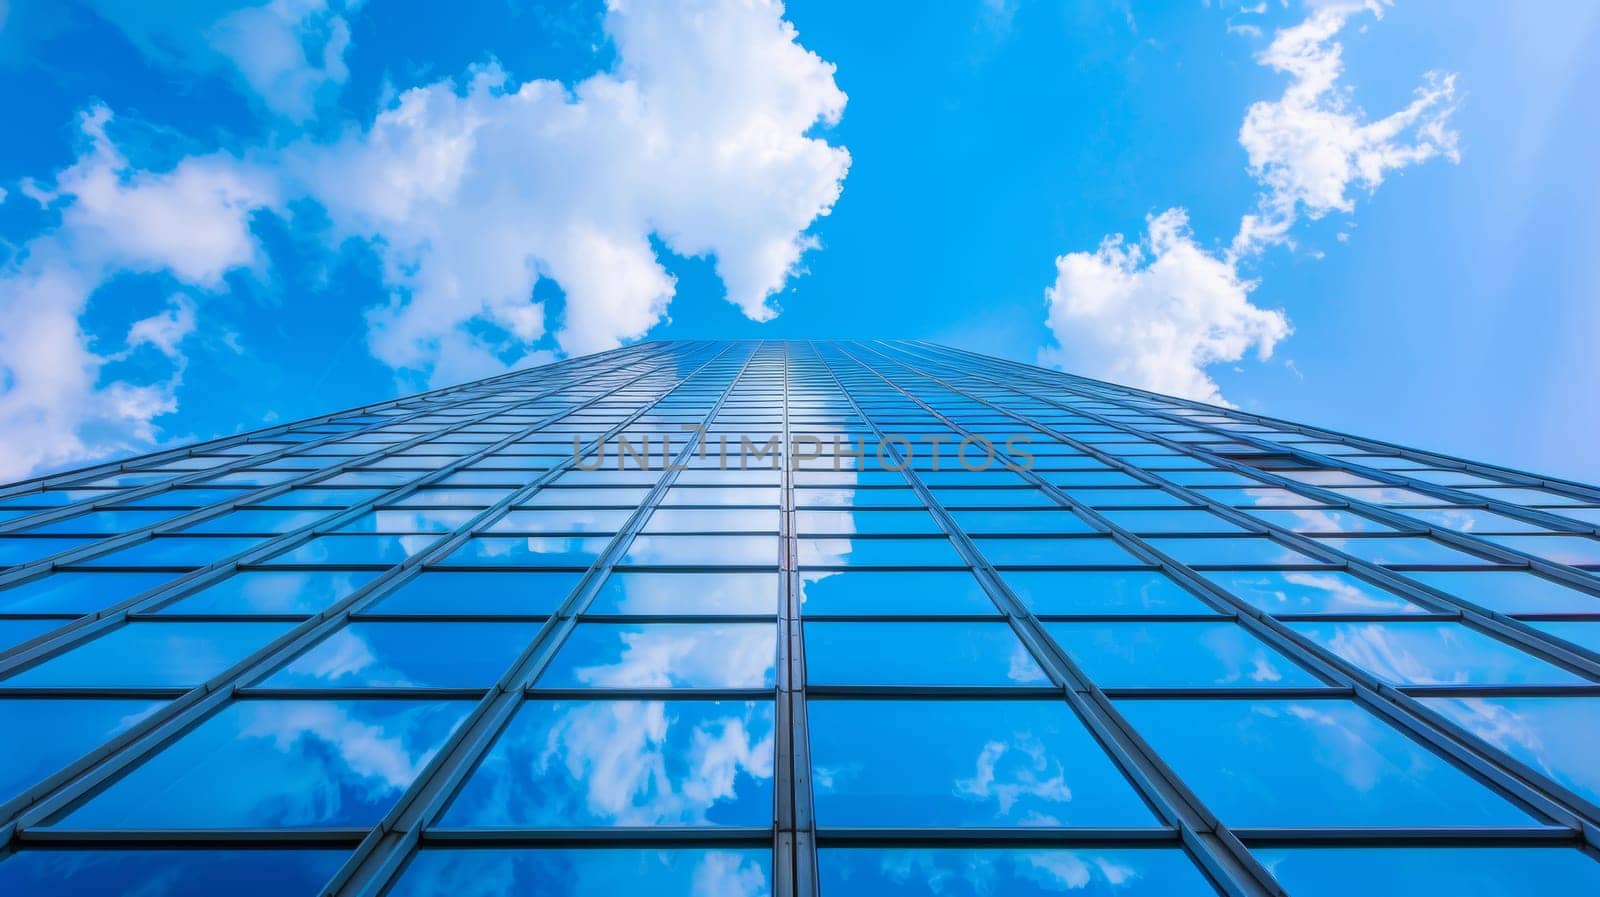 A view of a tall building with clouds in the sky